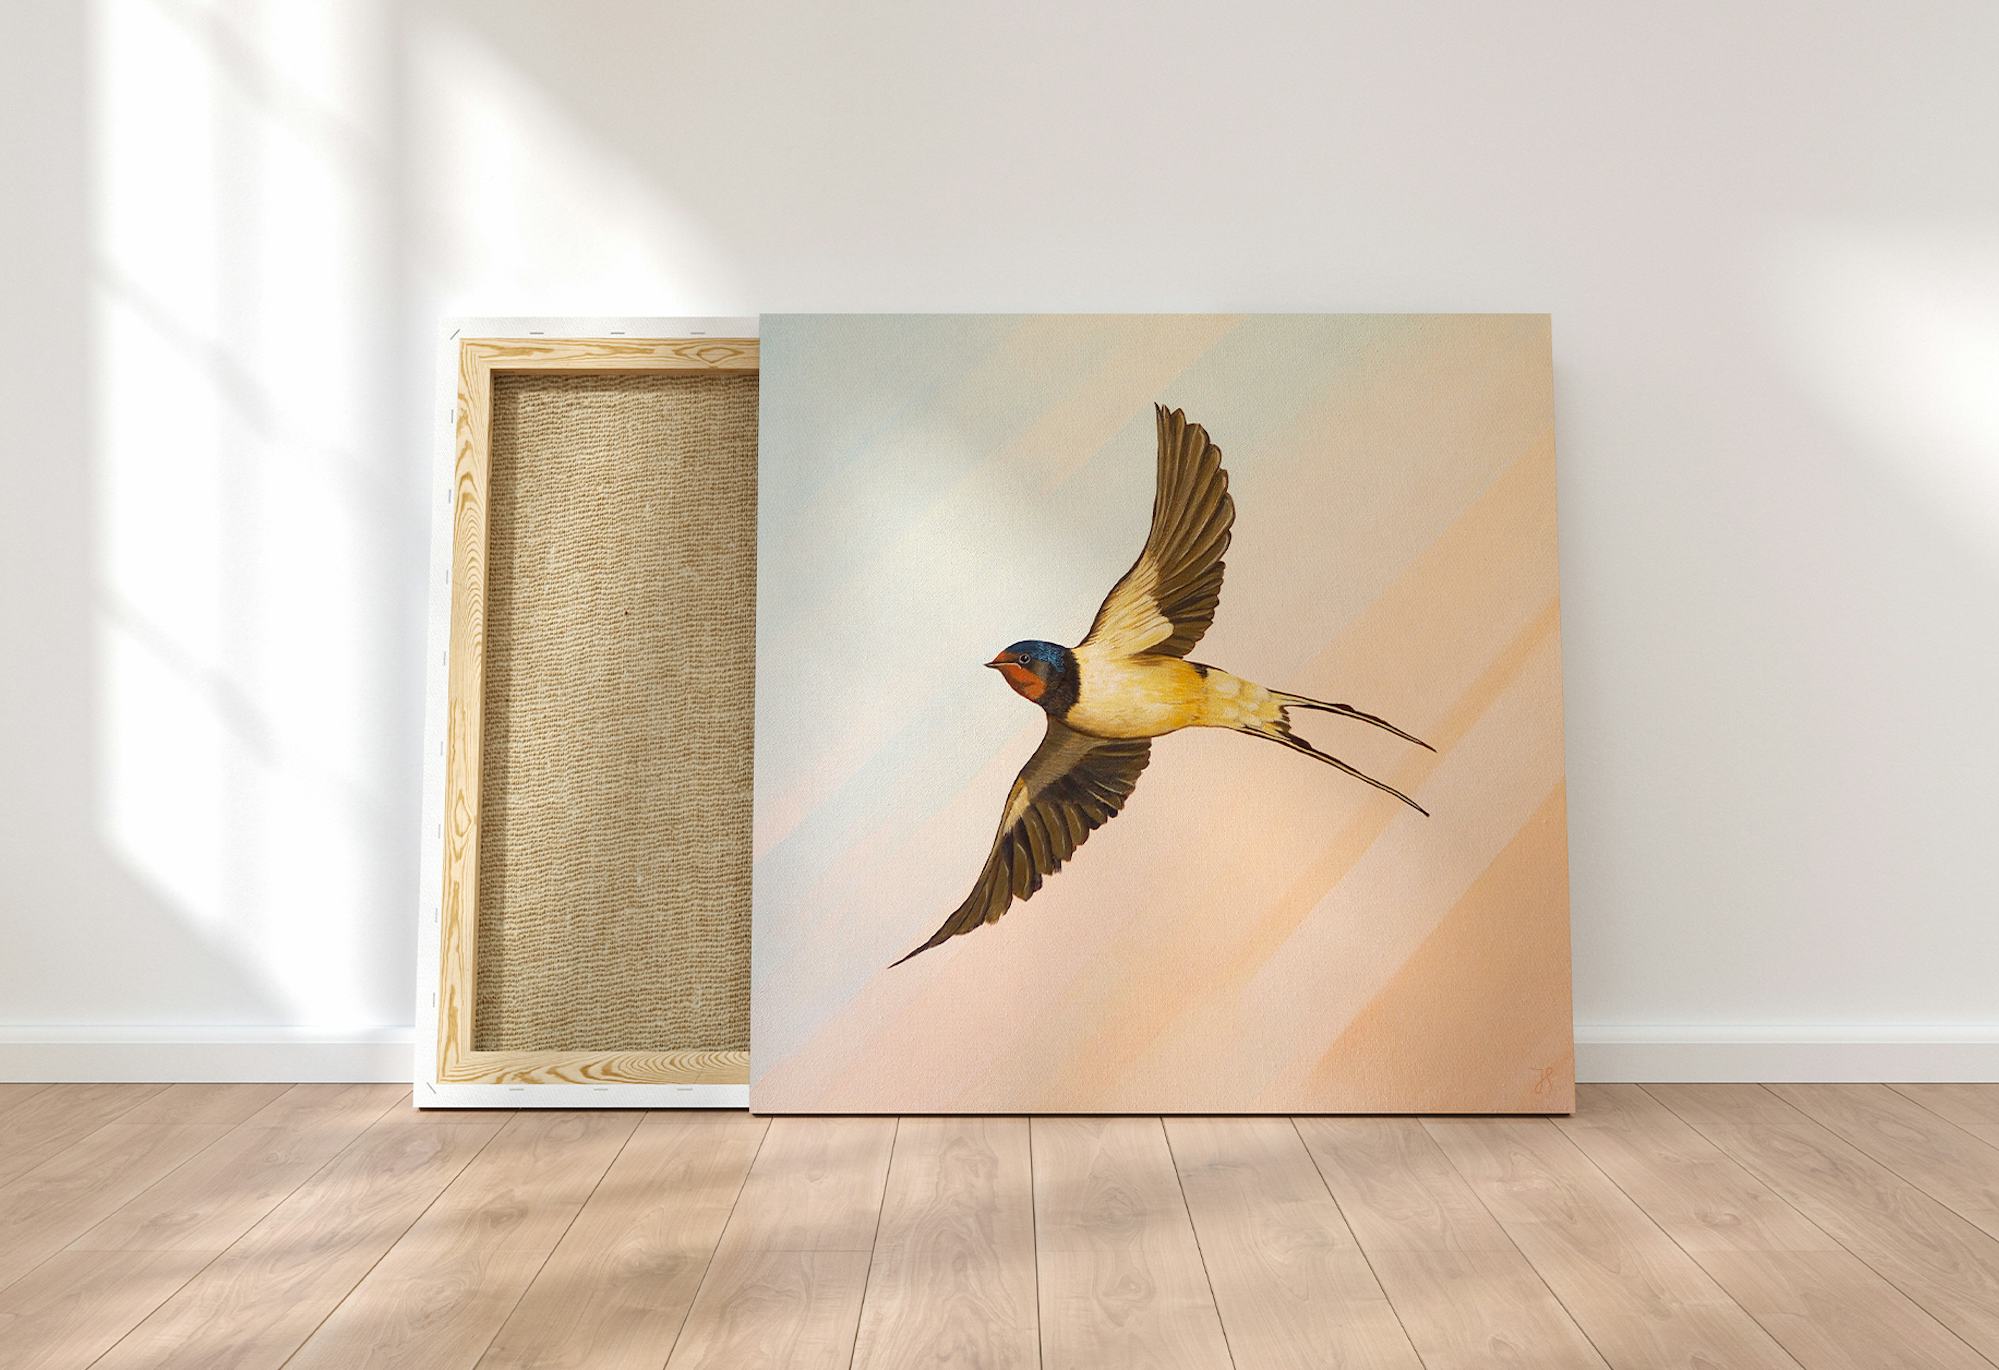 Painting of a welcome swallow on a canvas, leaned against the wall, with its wings spread, on an abstract pastel background.